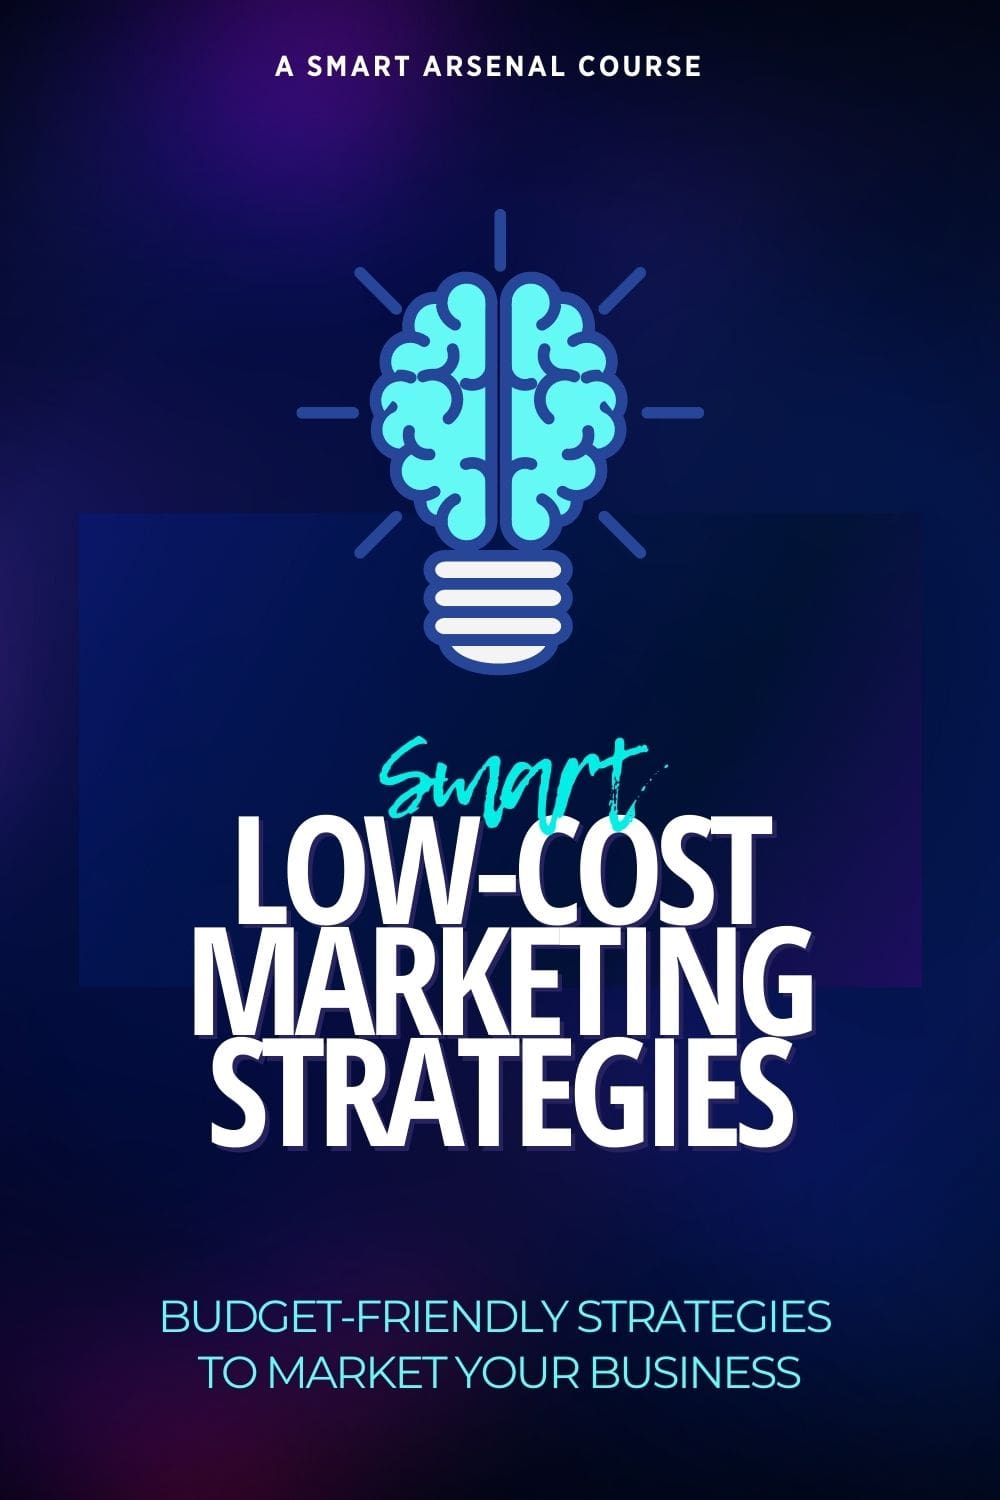 Low Cost Marketing Strategies Course